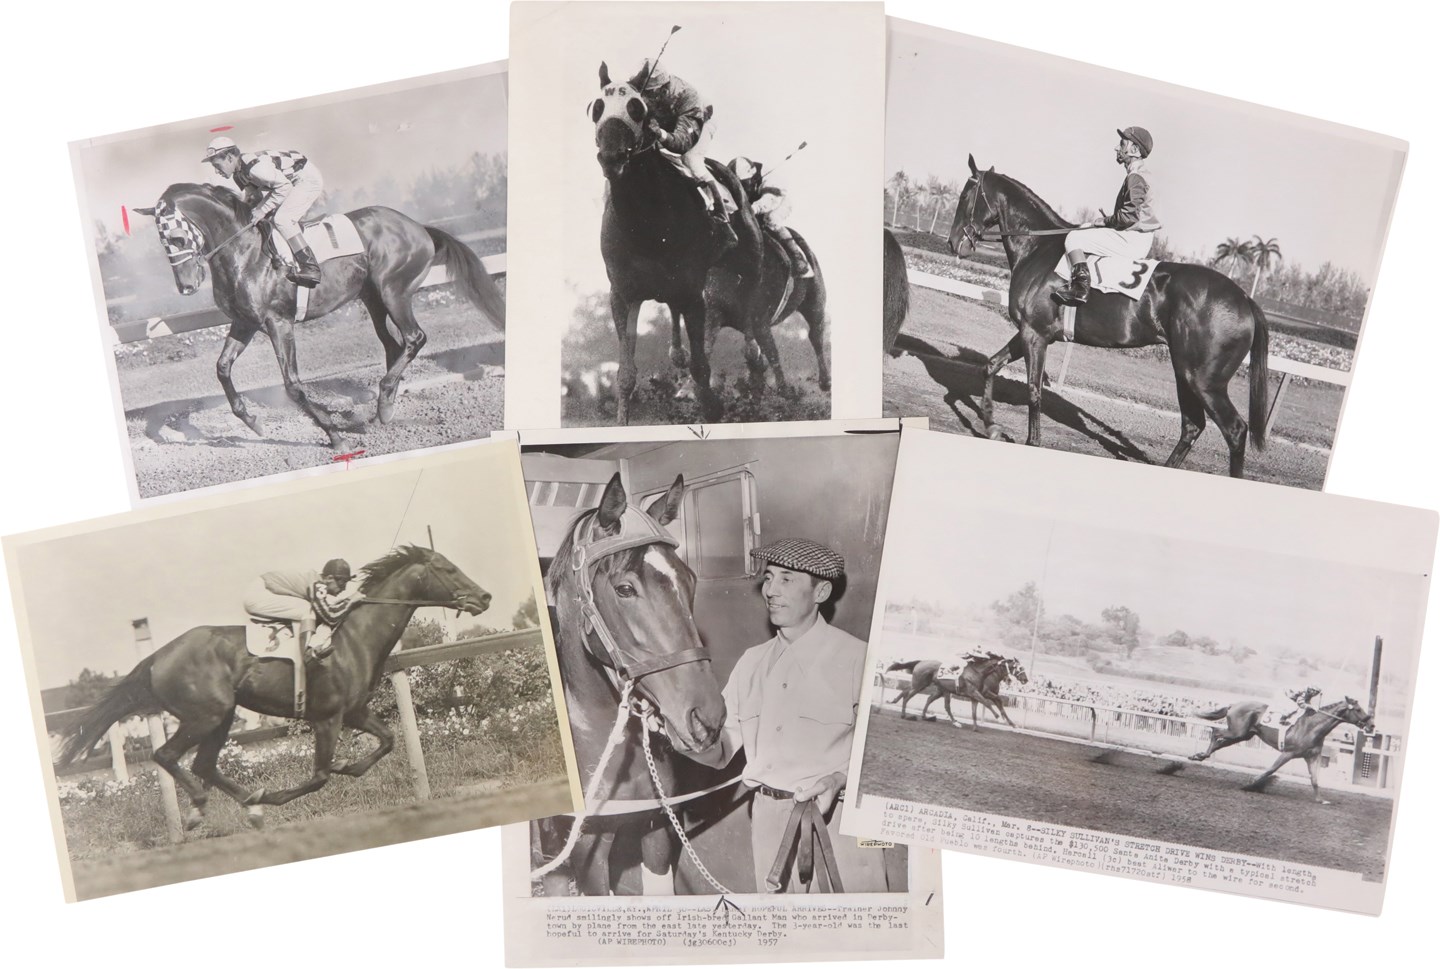 Horse Racing - Beautiful Photographs of Horse Racing's Star Thoroughbred Horses of the 1950s (56)